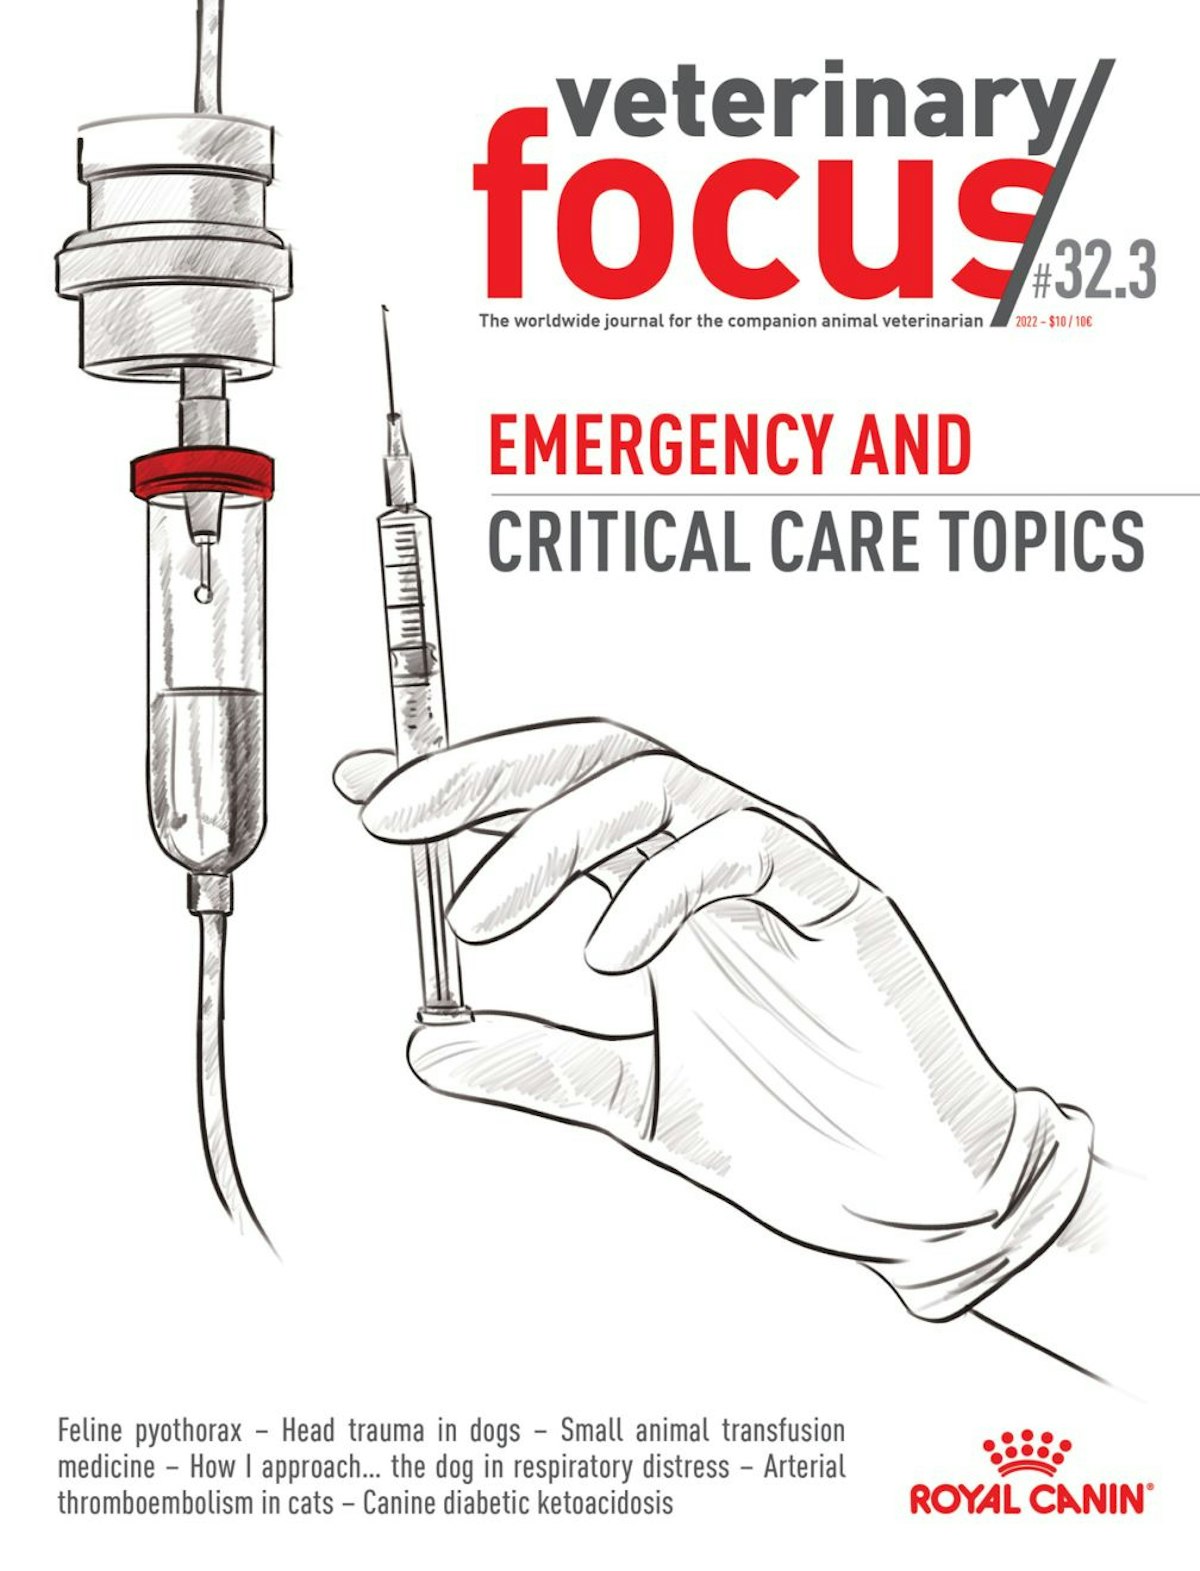 Emergency and critical care topics